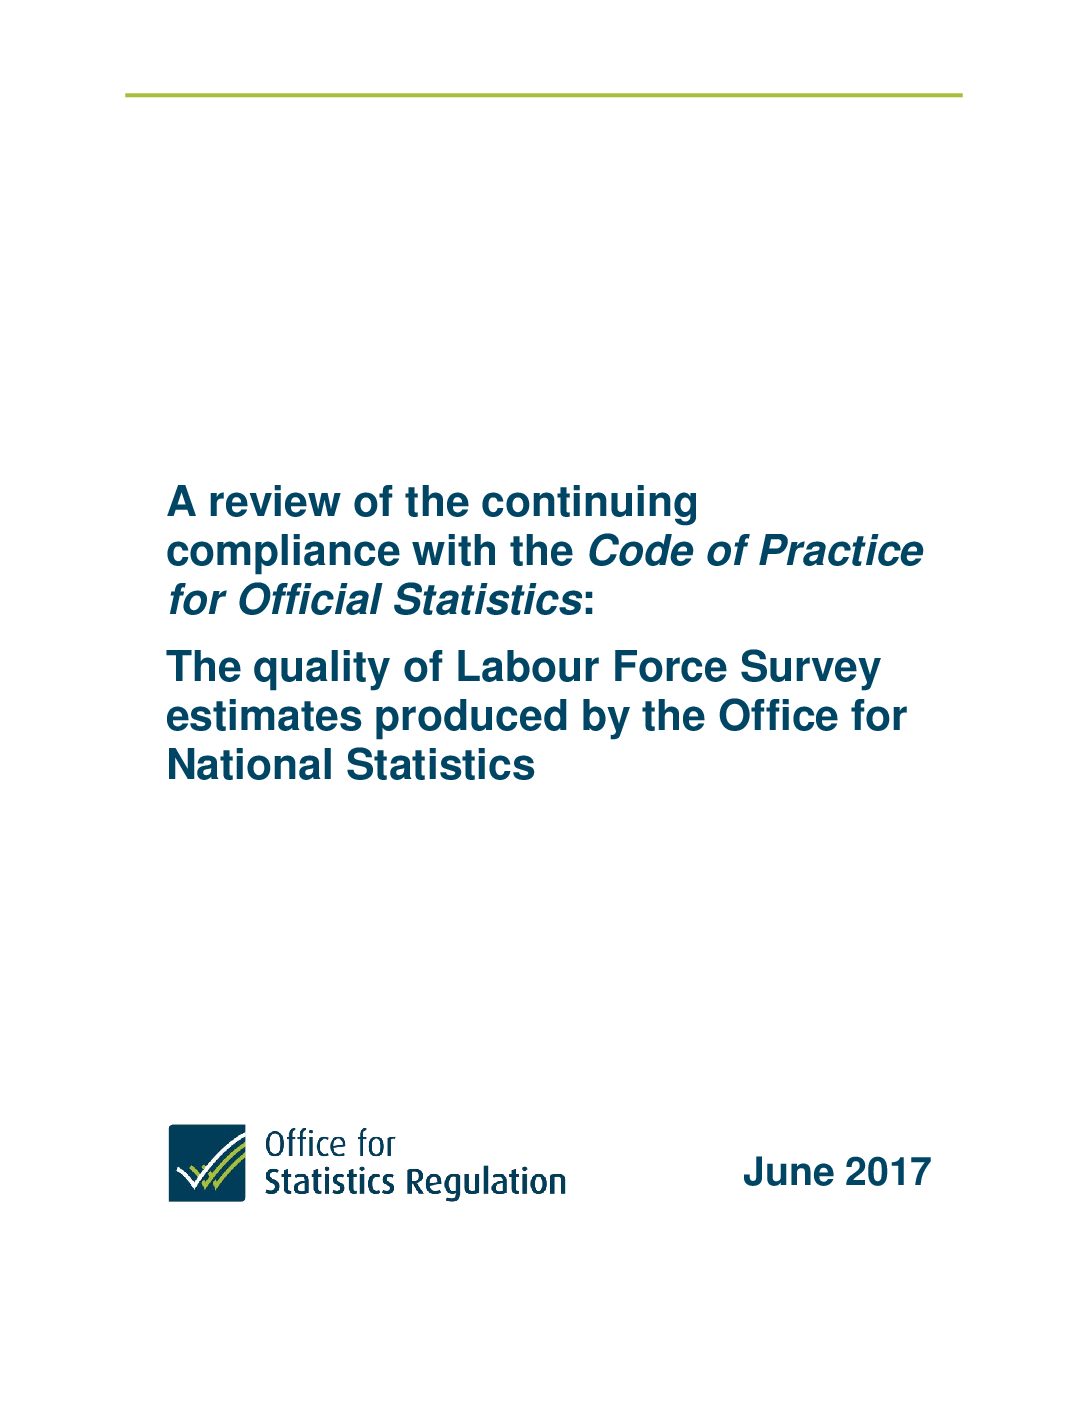 Compliance Review: The quality of Labour Force Survey estimates produced by the Office for National Statistics